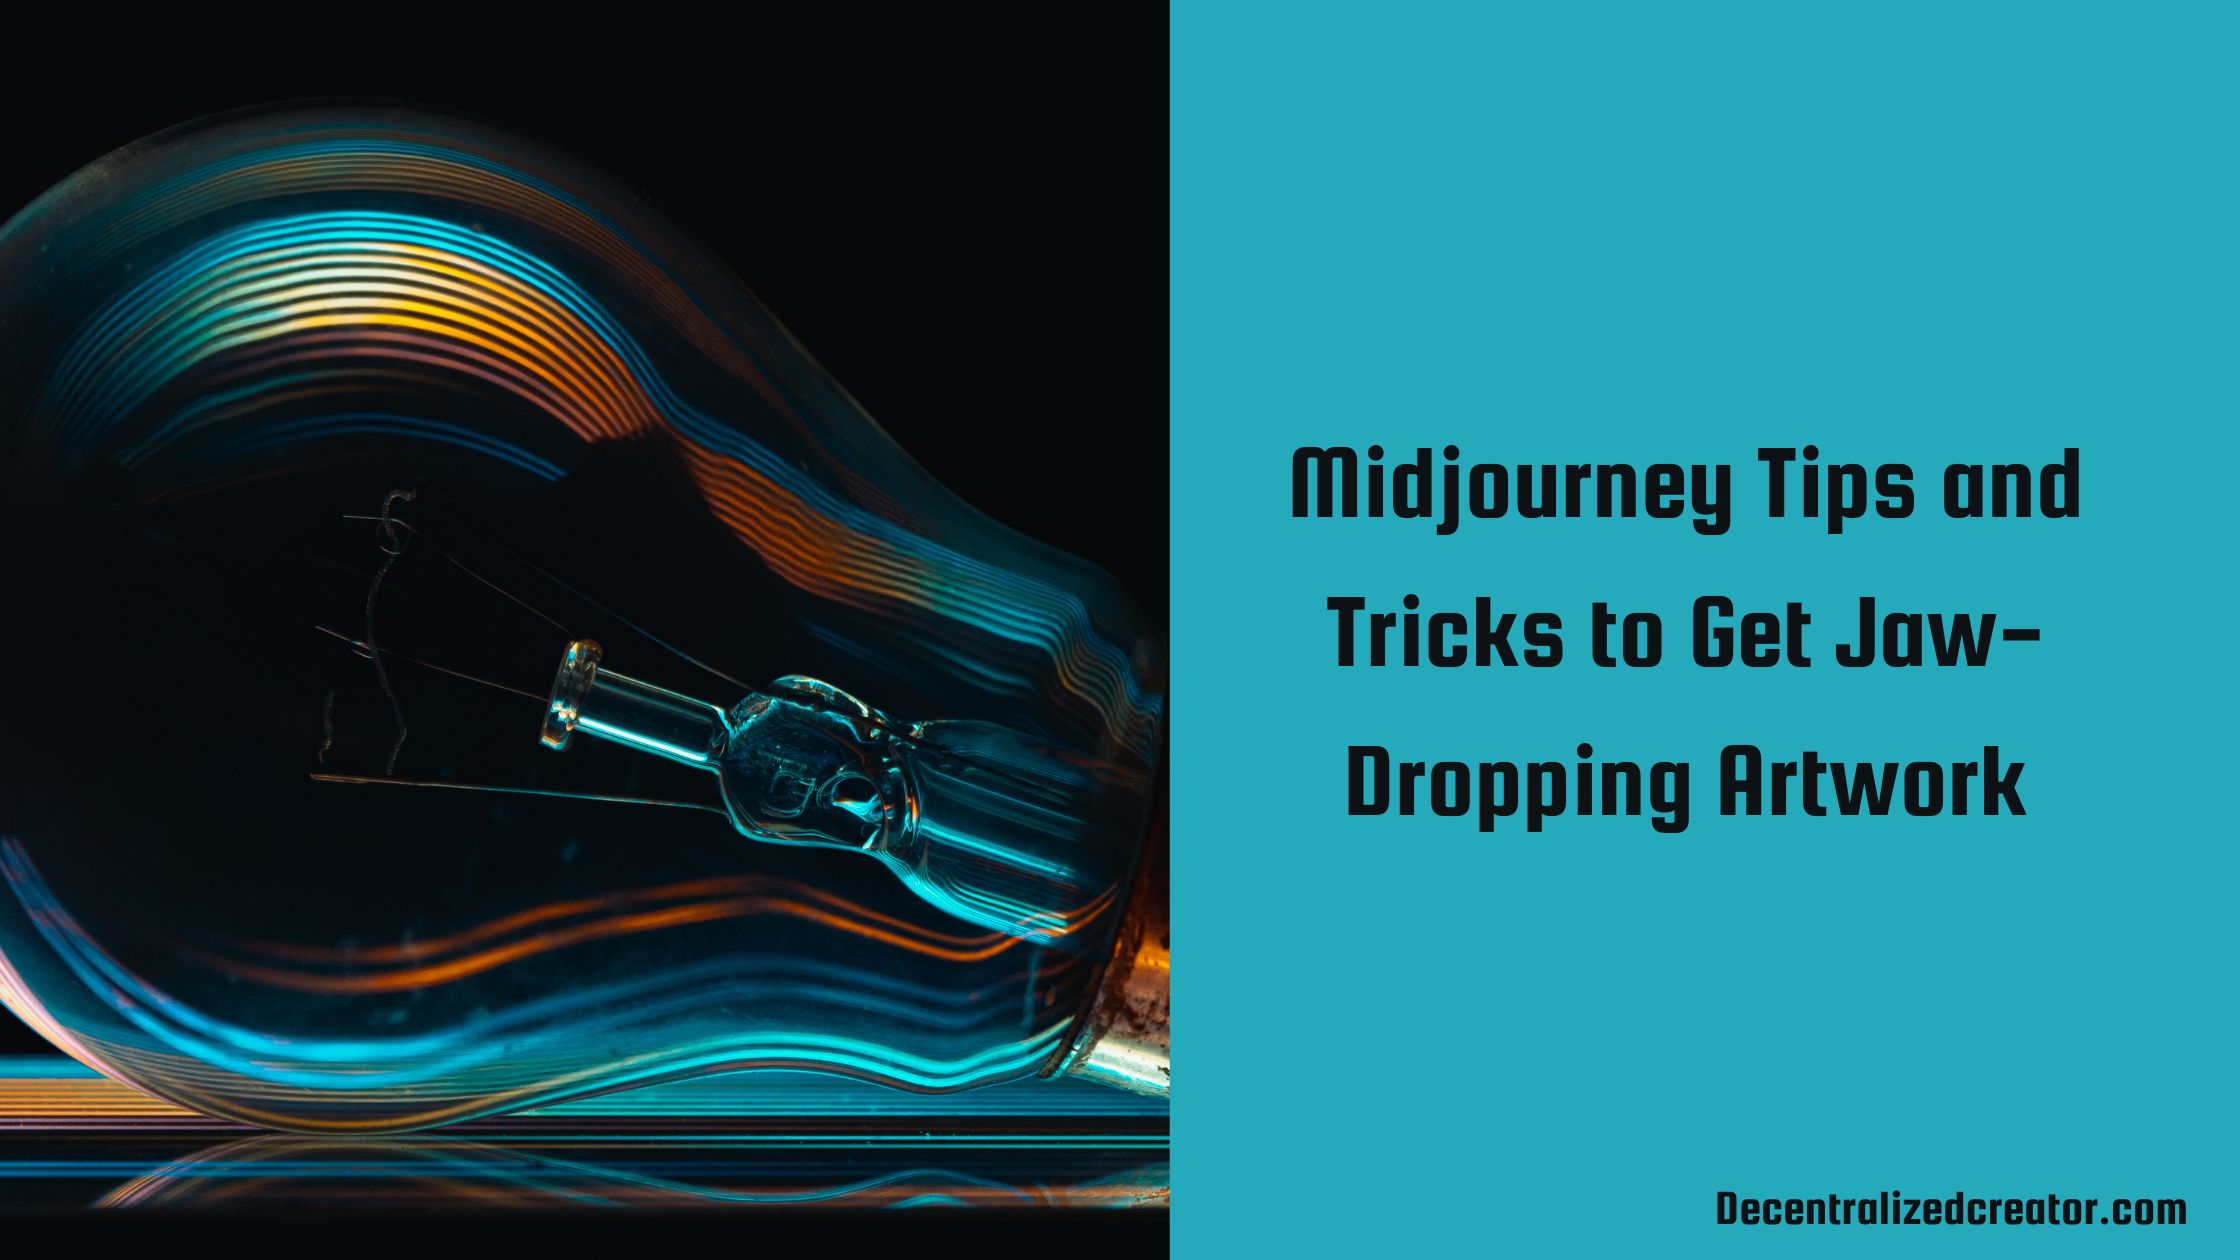 Midjourney Tips and Tricks to Get Jaw-Dropping Artwork